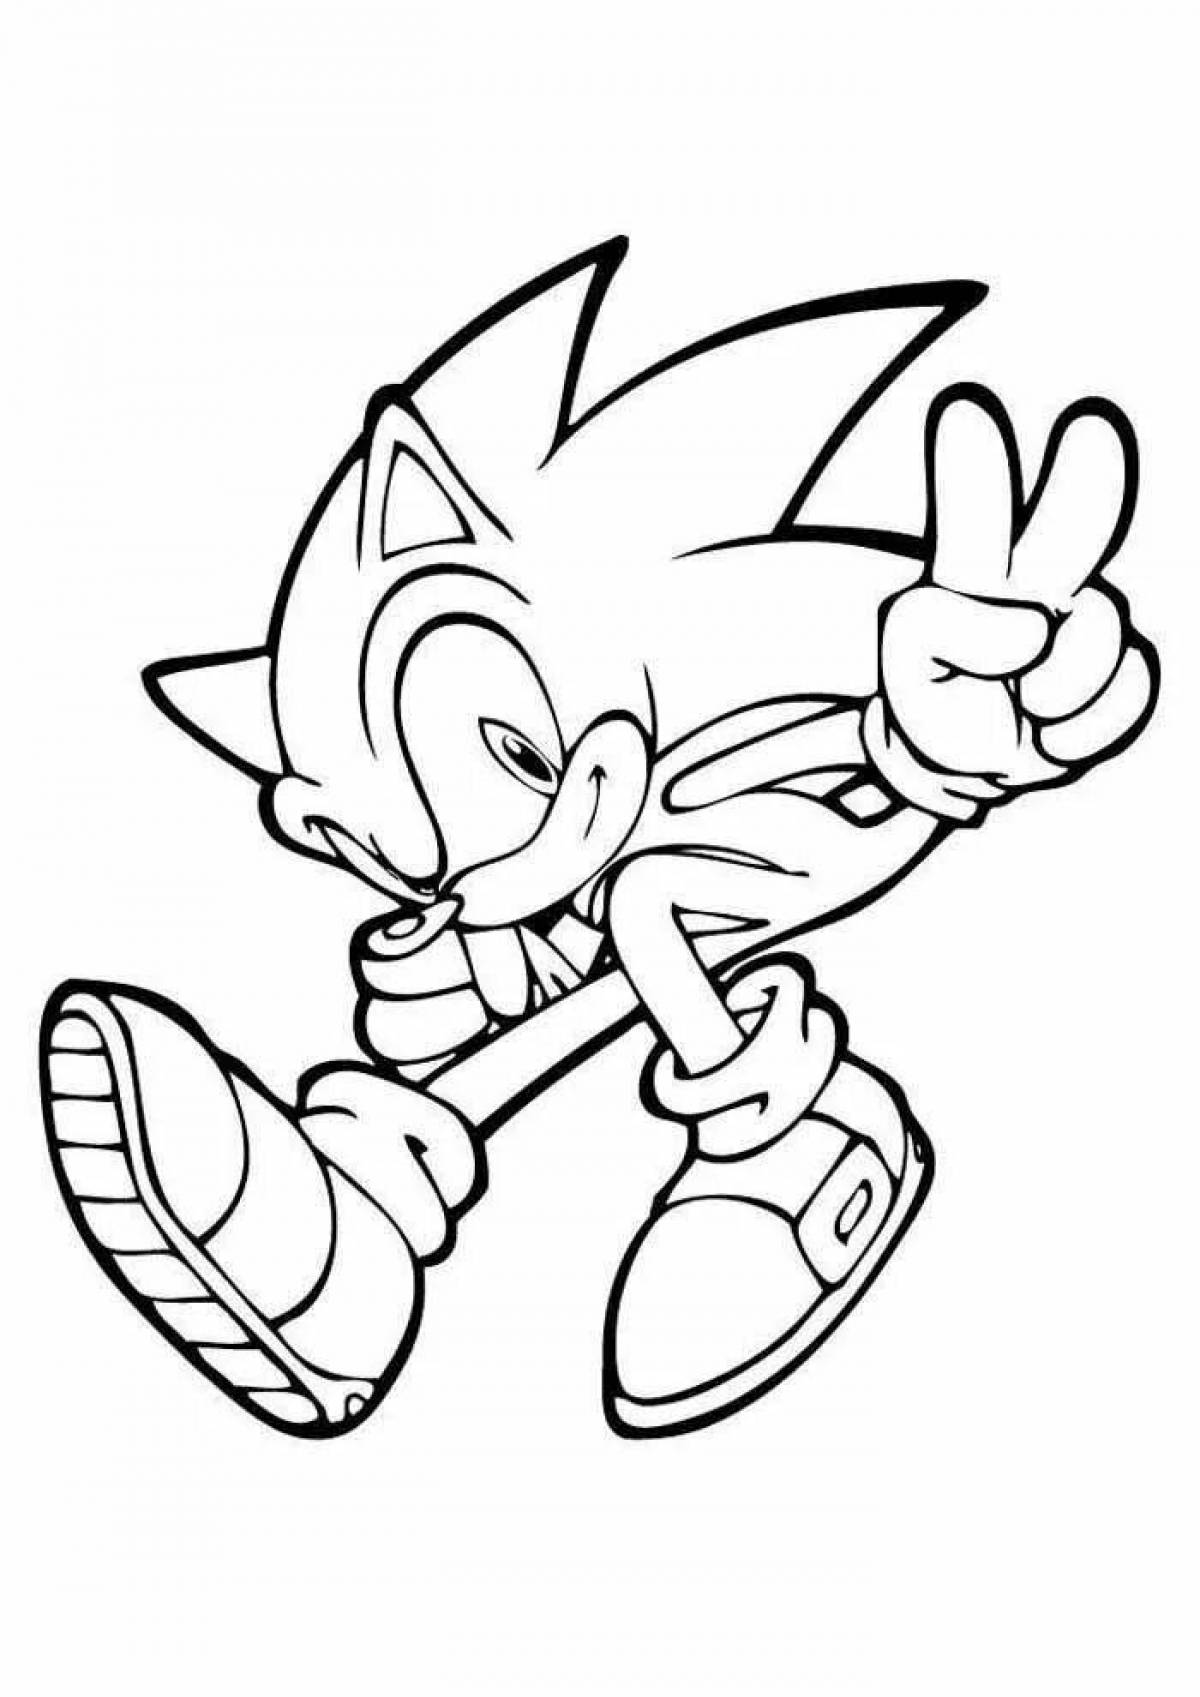 Sonic Live White Coloring Page